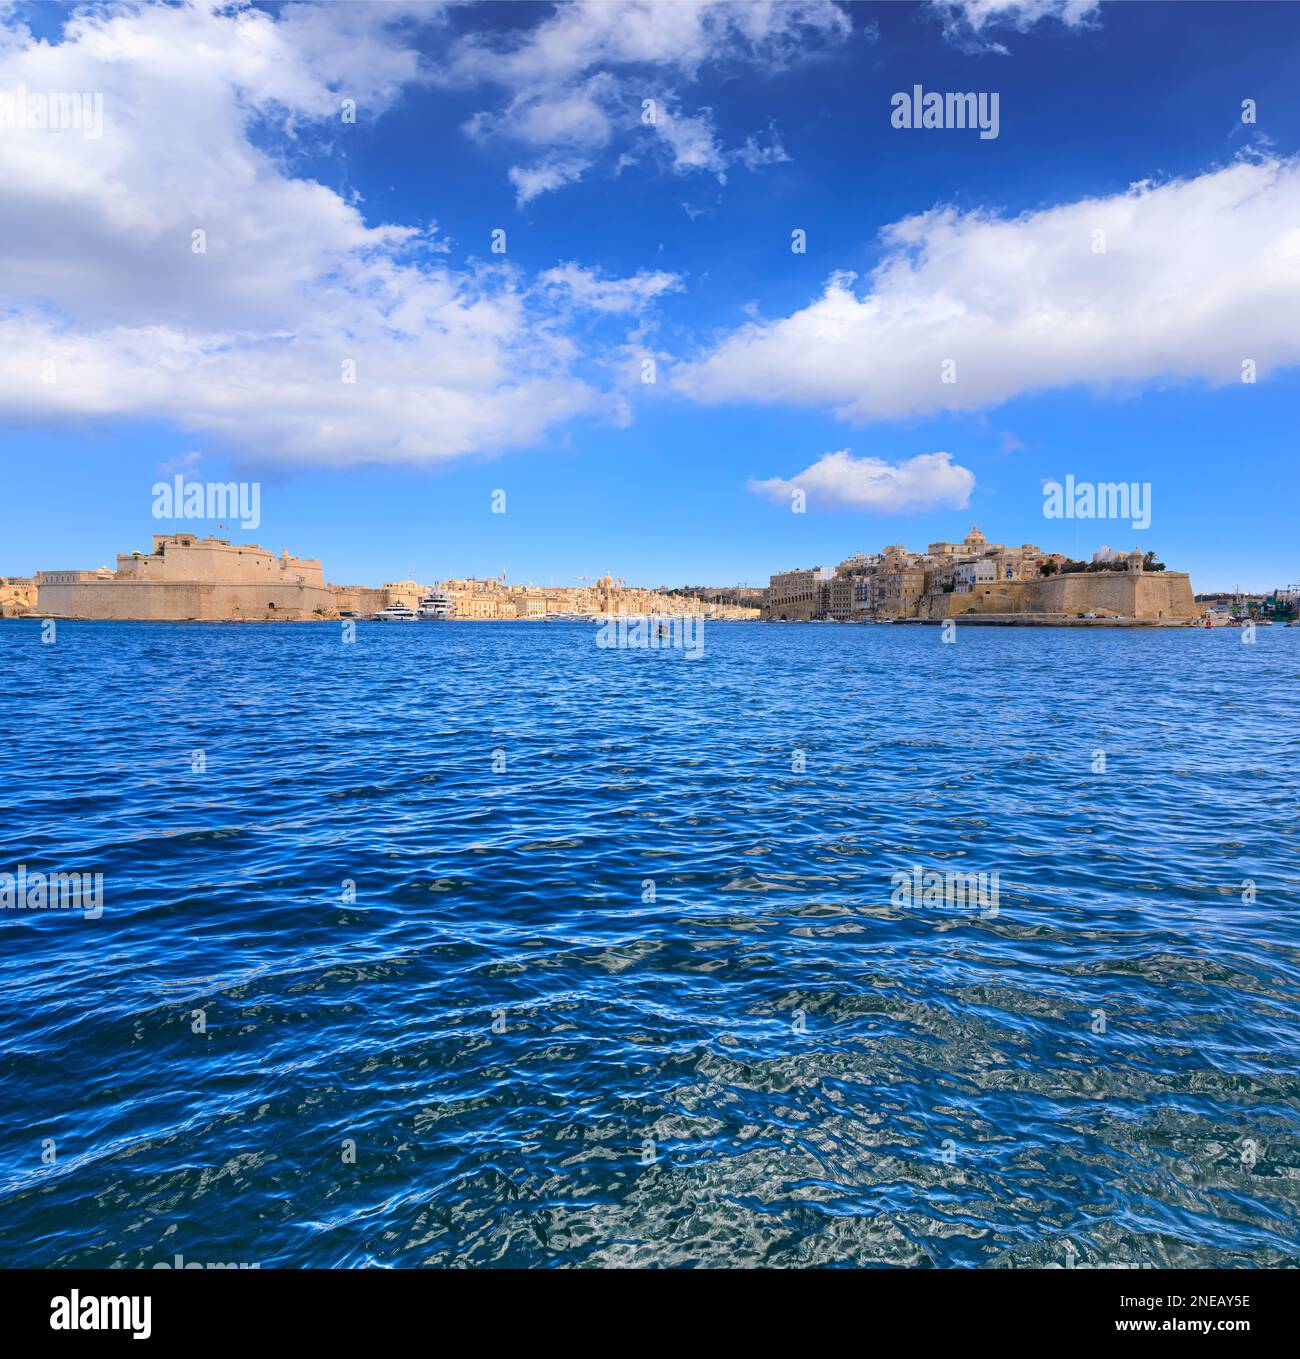 Grand Harbour seascape in Valletta, capital of Malta: view of Birgu, an old fortified city with Fort Saint Angelo. Stock Photo